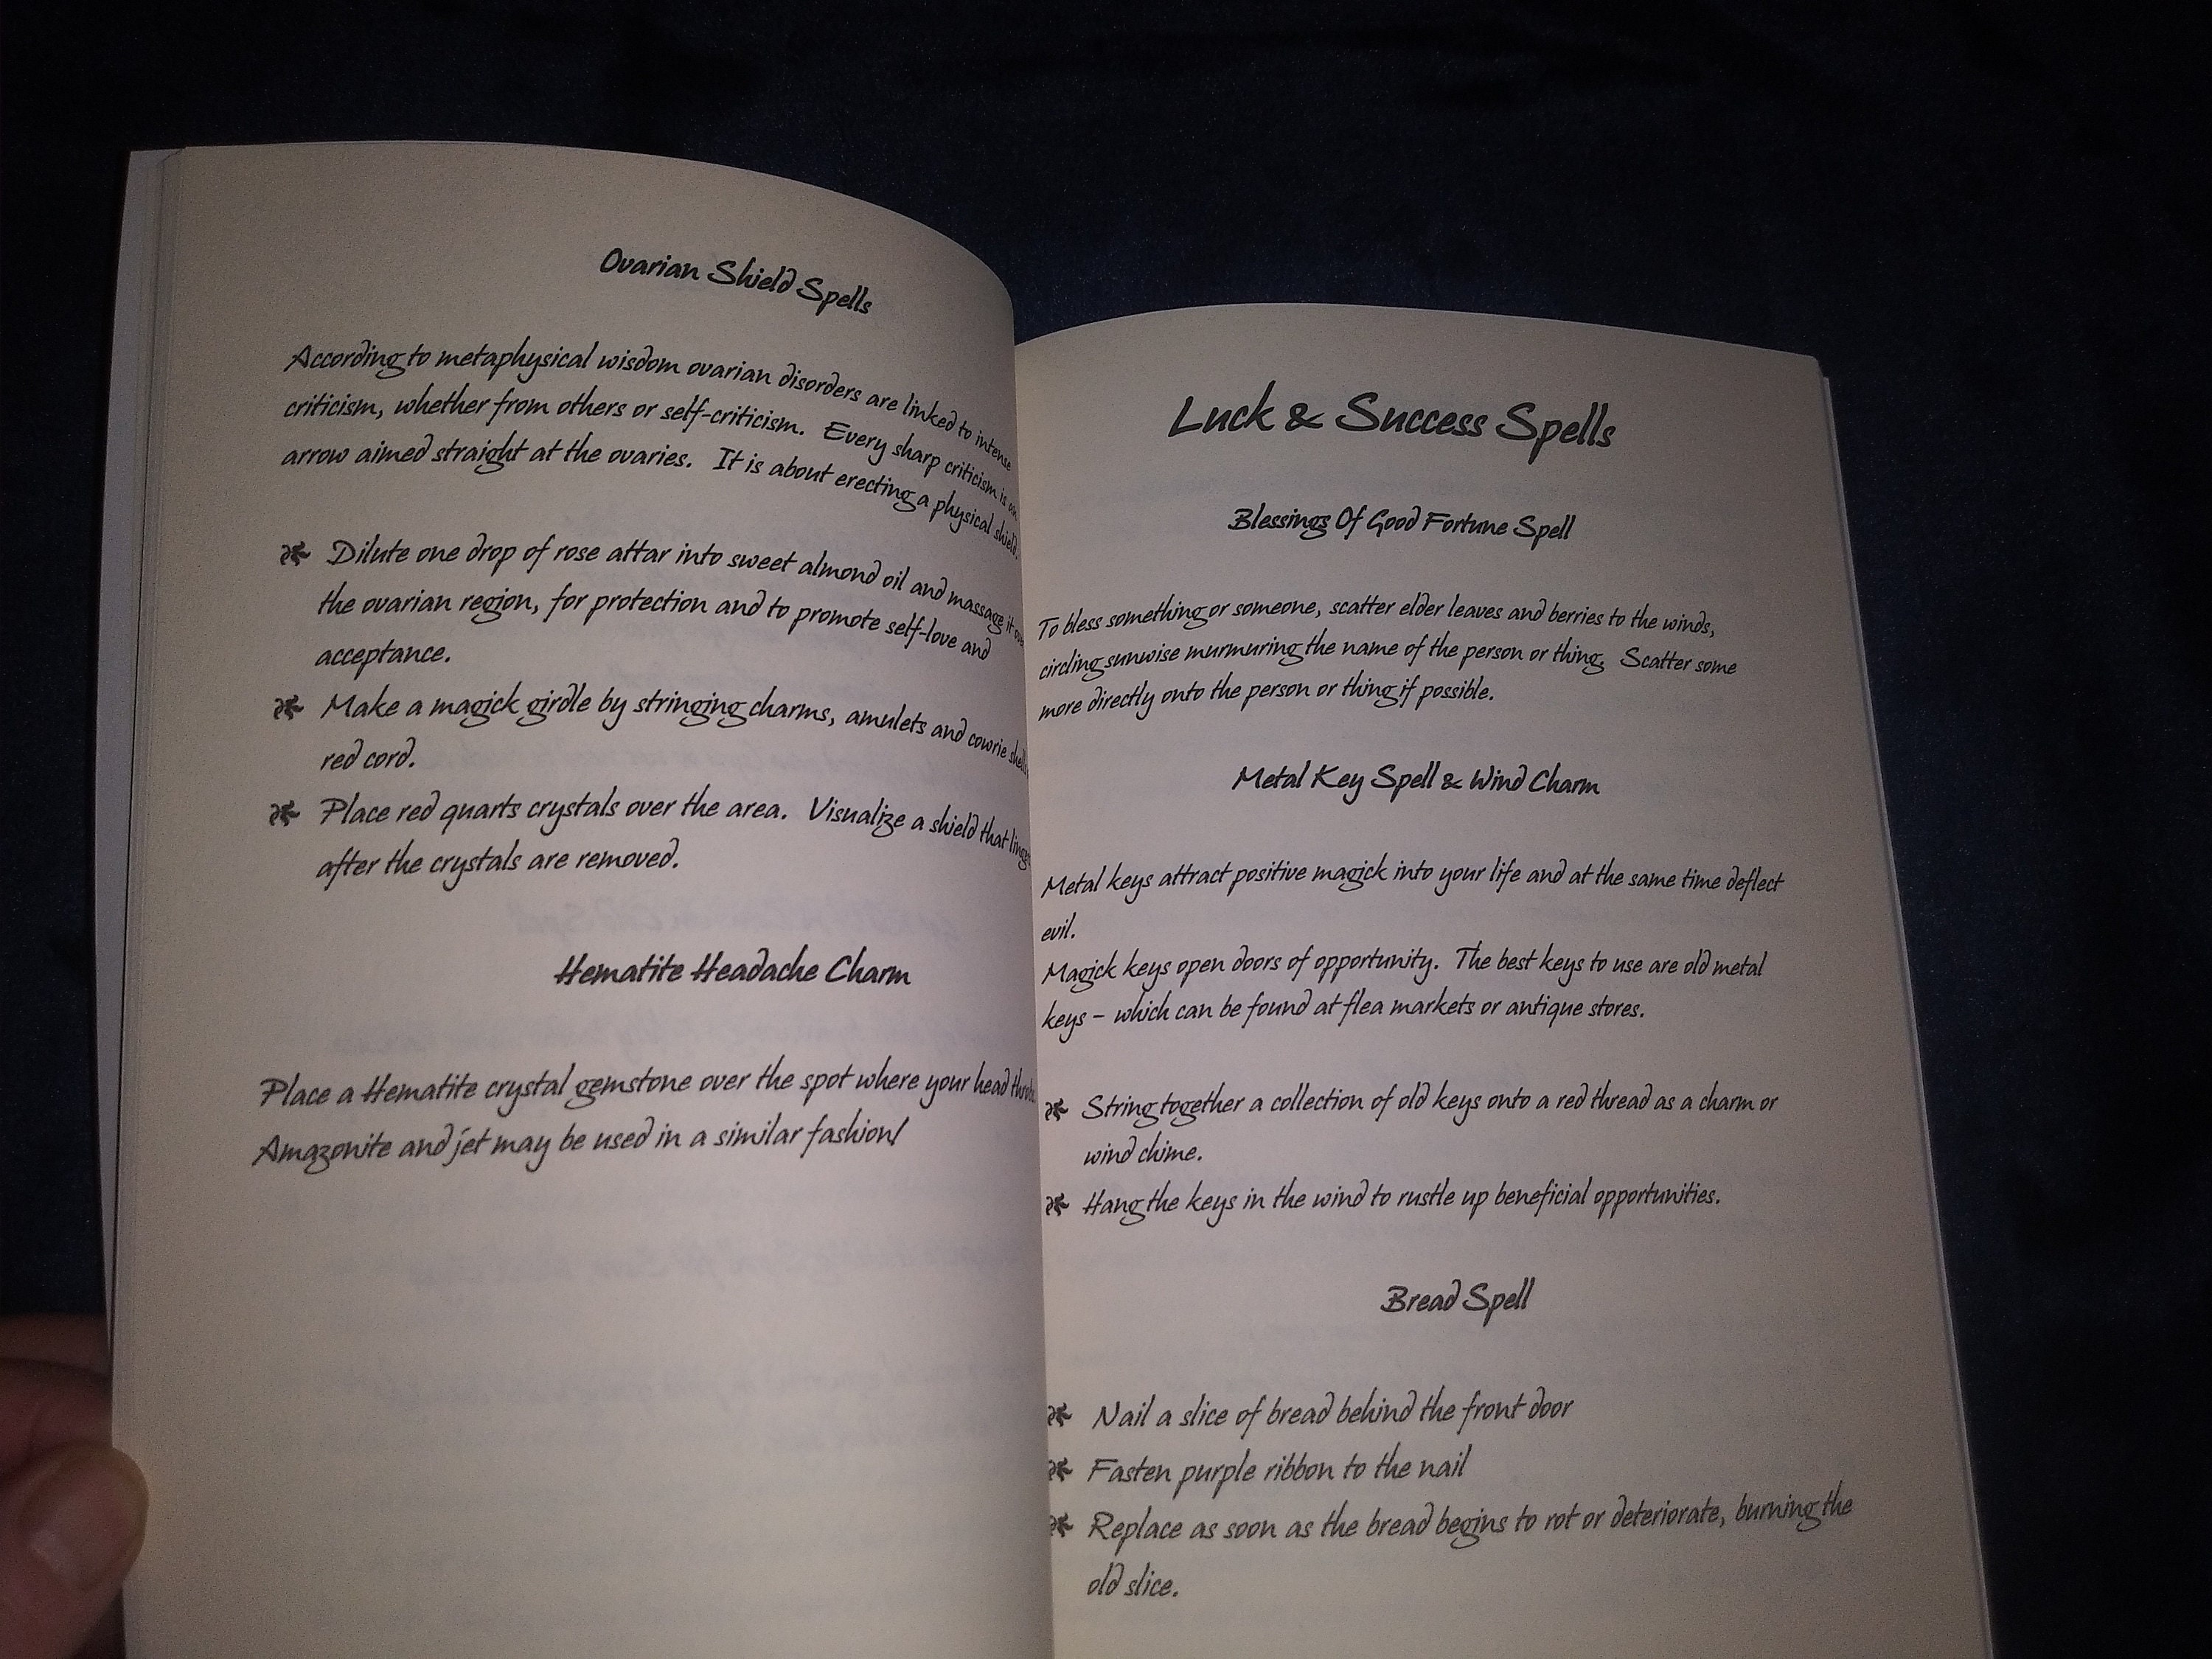 Book Of Shadows - 150 Spells, Charms, Potions and Enchantments for Wiccans:  Witches Spell Book - Perfect for both practicing Witches or beginners.  (Paperback)